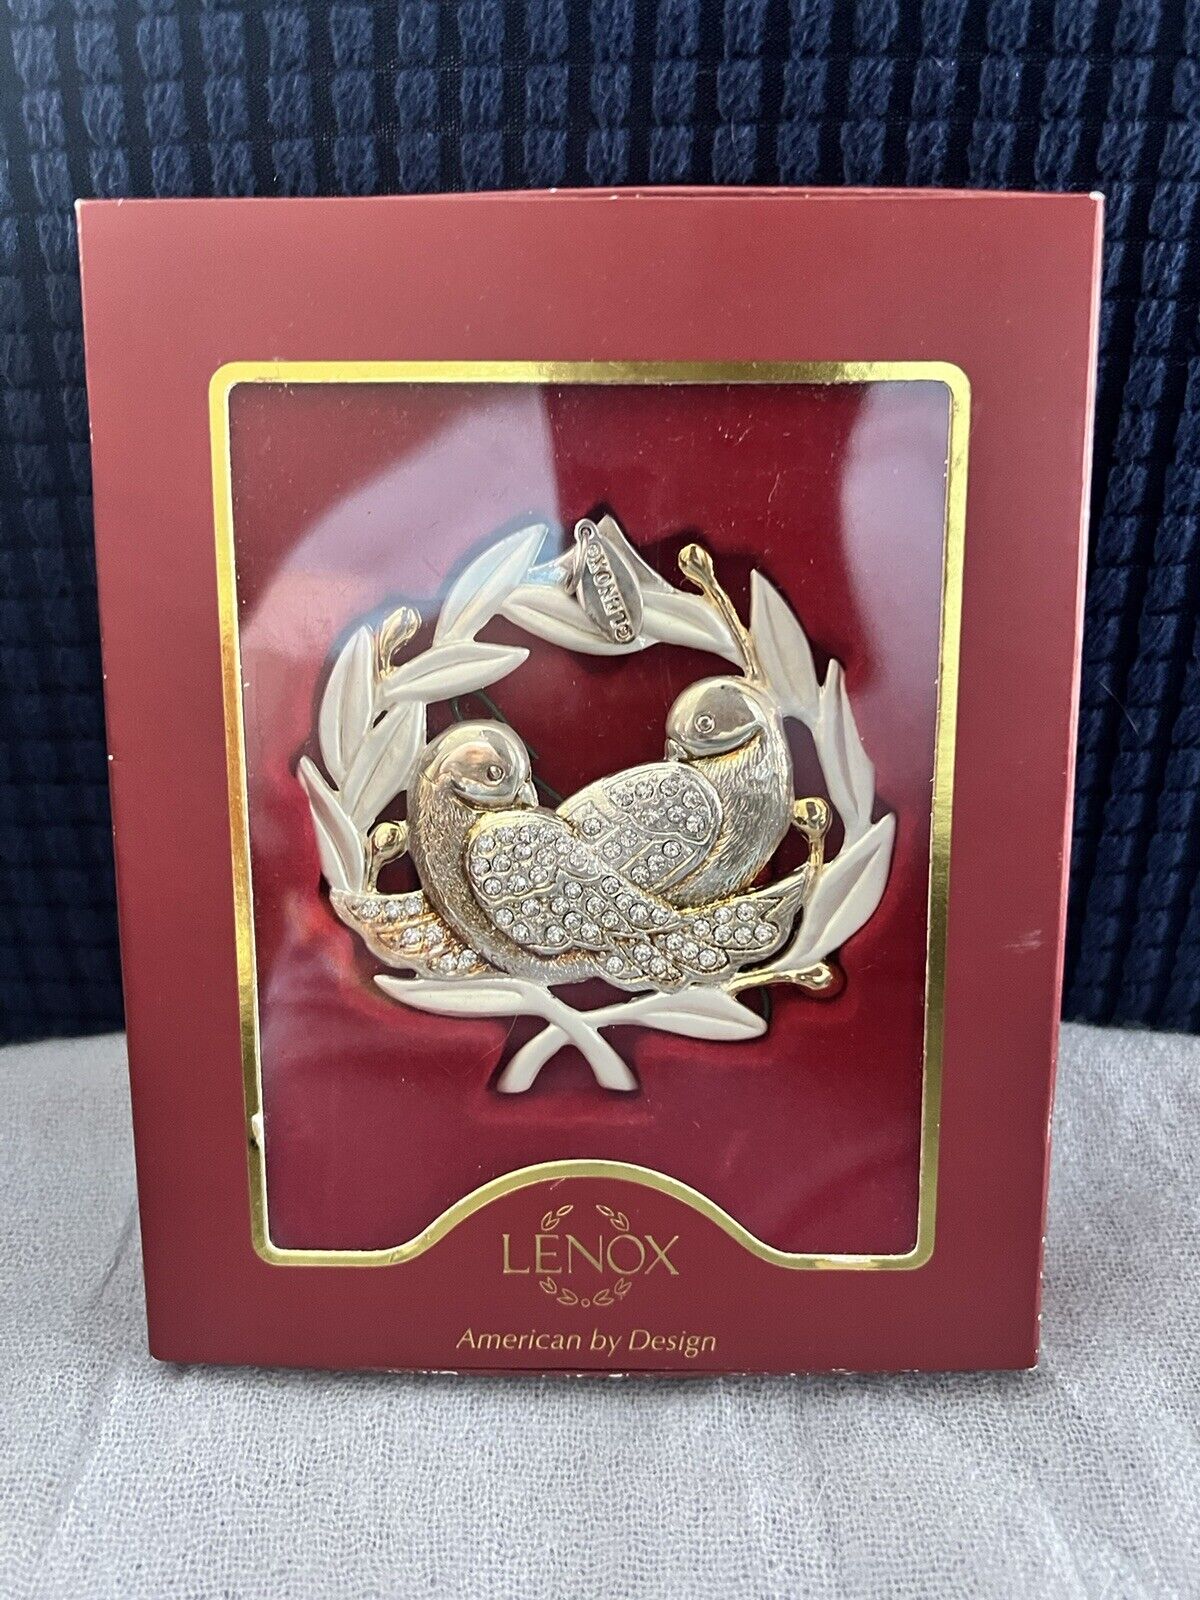 LENOX TWO TURTLE DOVES SILVERPLATED ORNAMENT